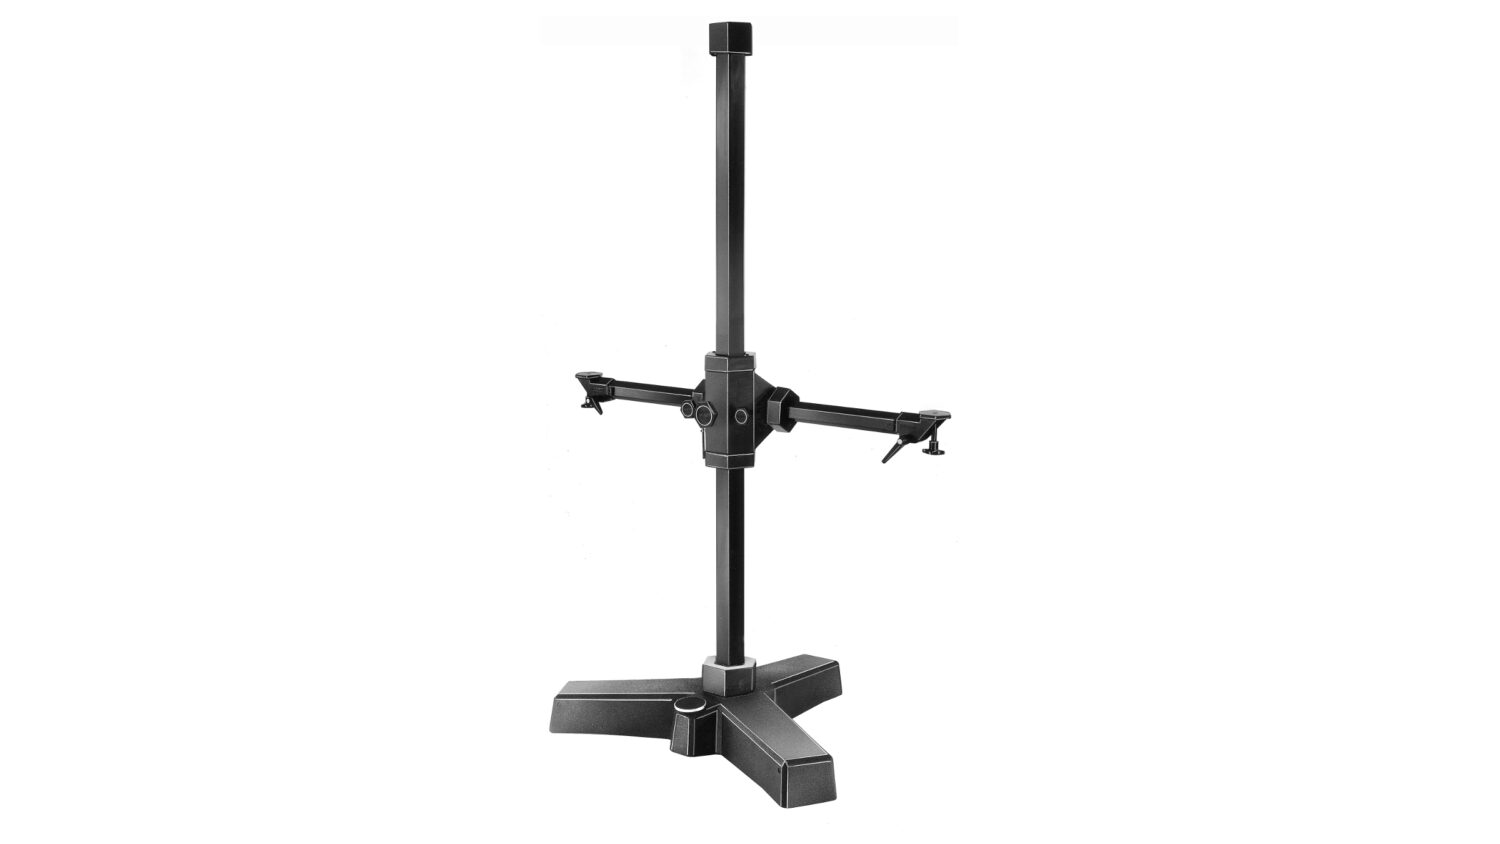 Foba Studio Foba Extended rotating platform, crank operated, for